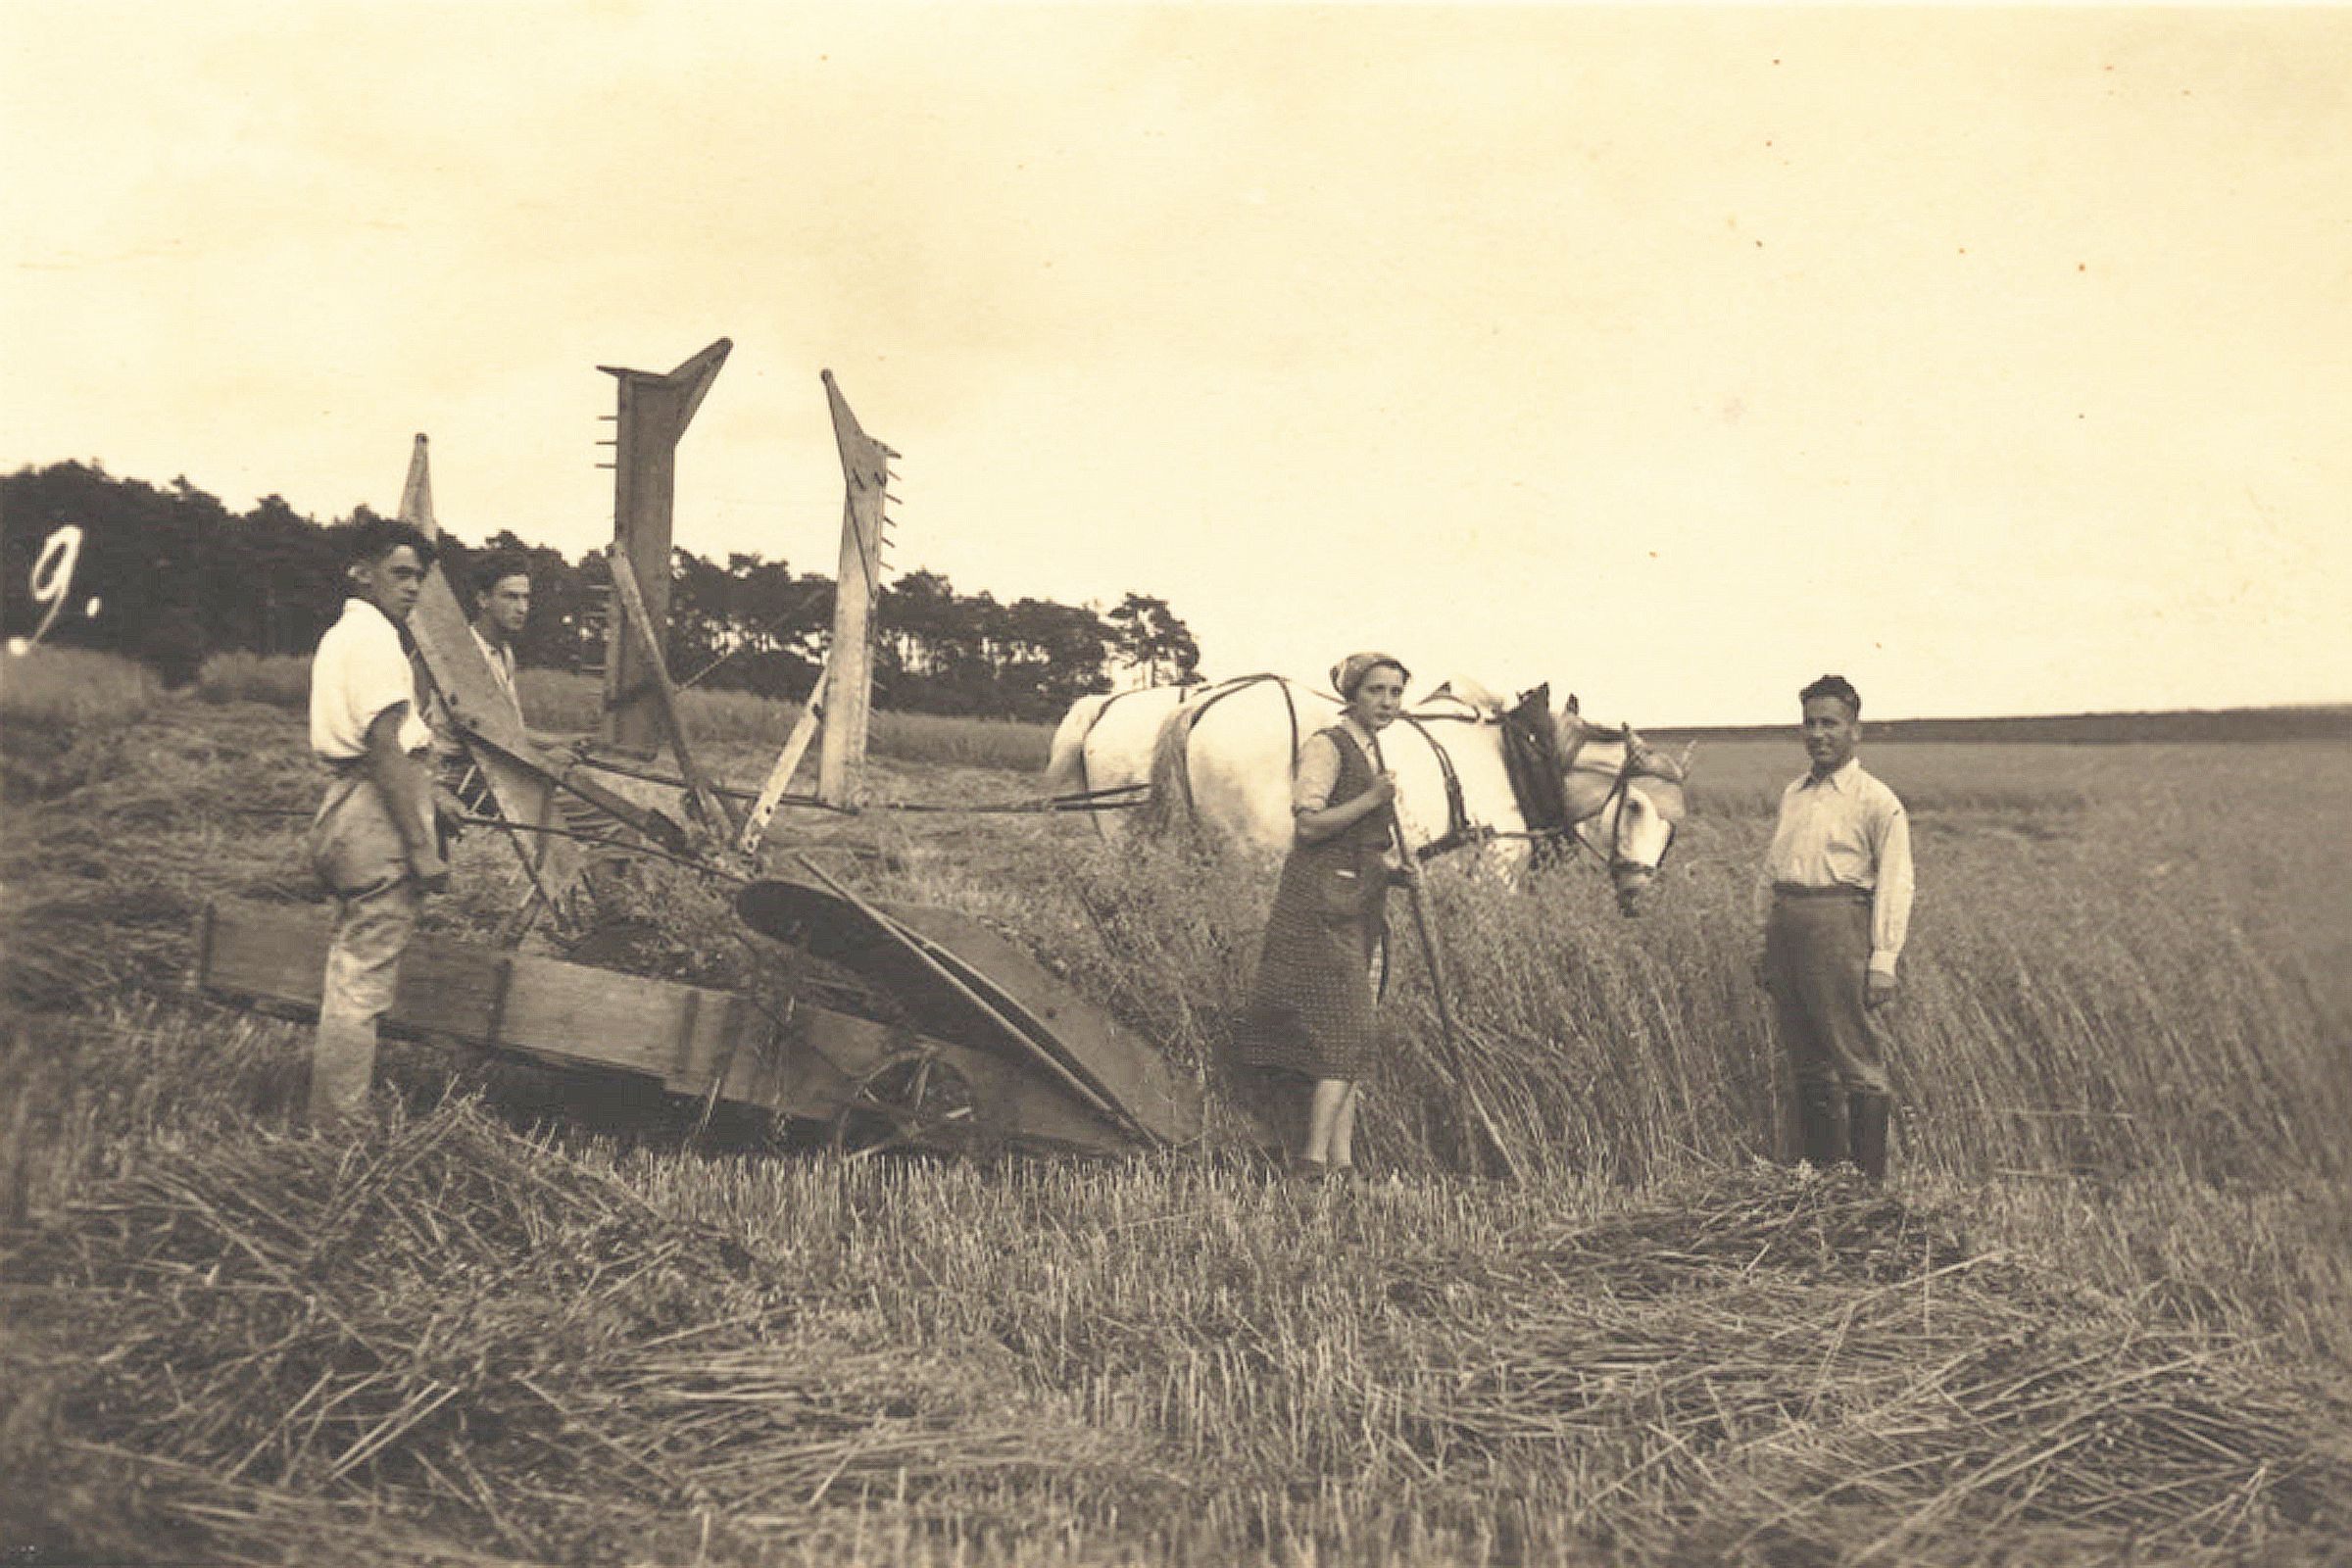 During the harvest of grain in the south of England